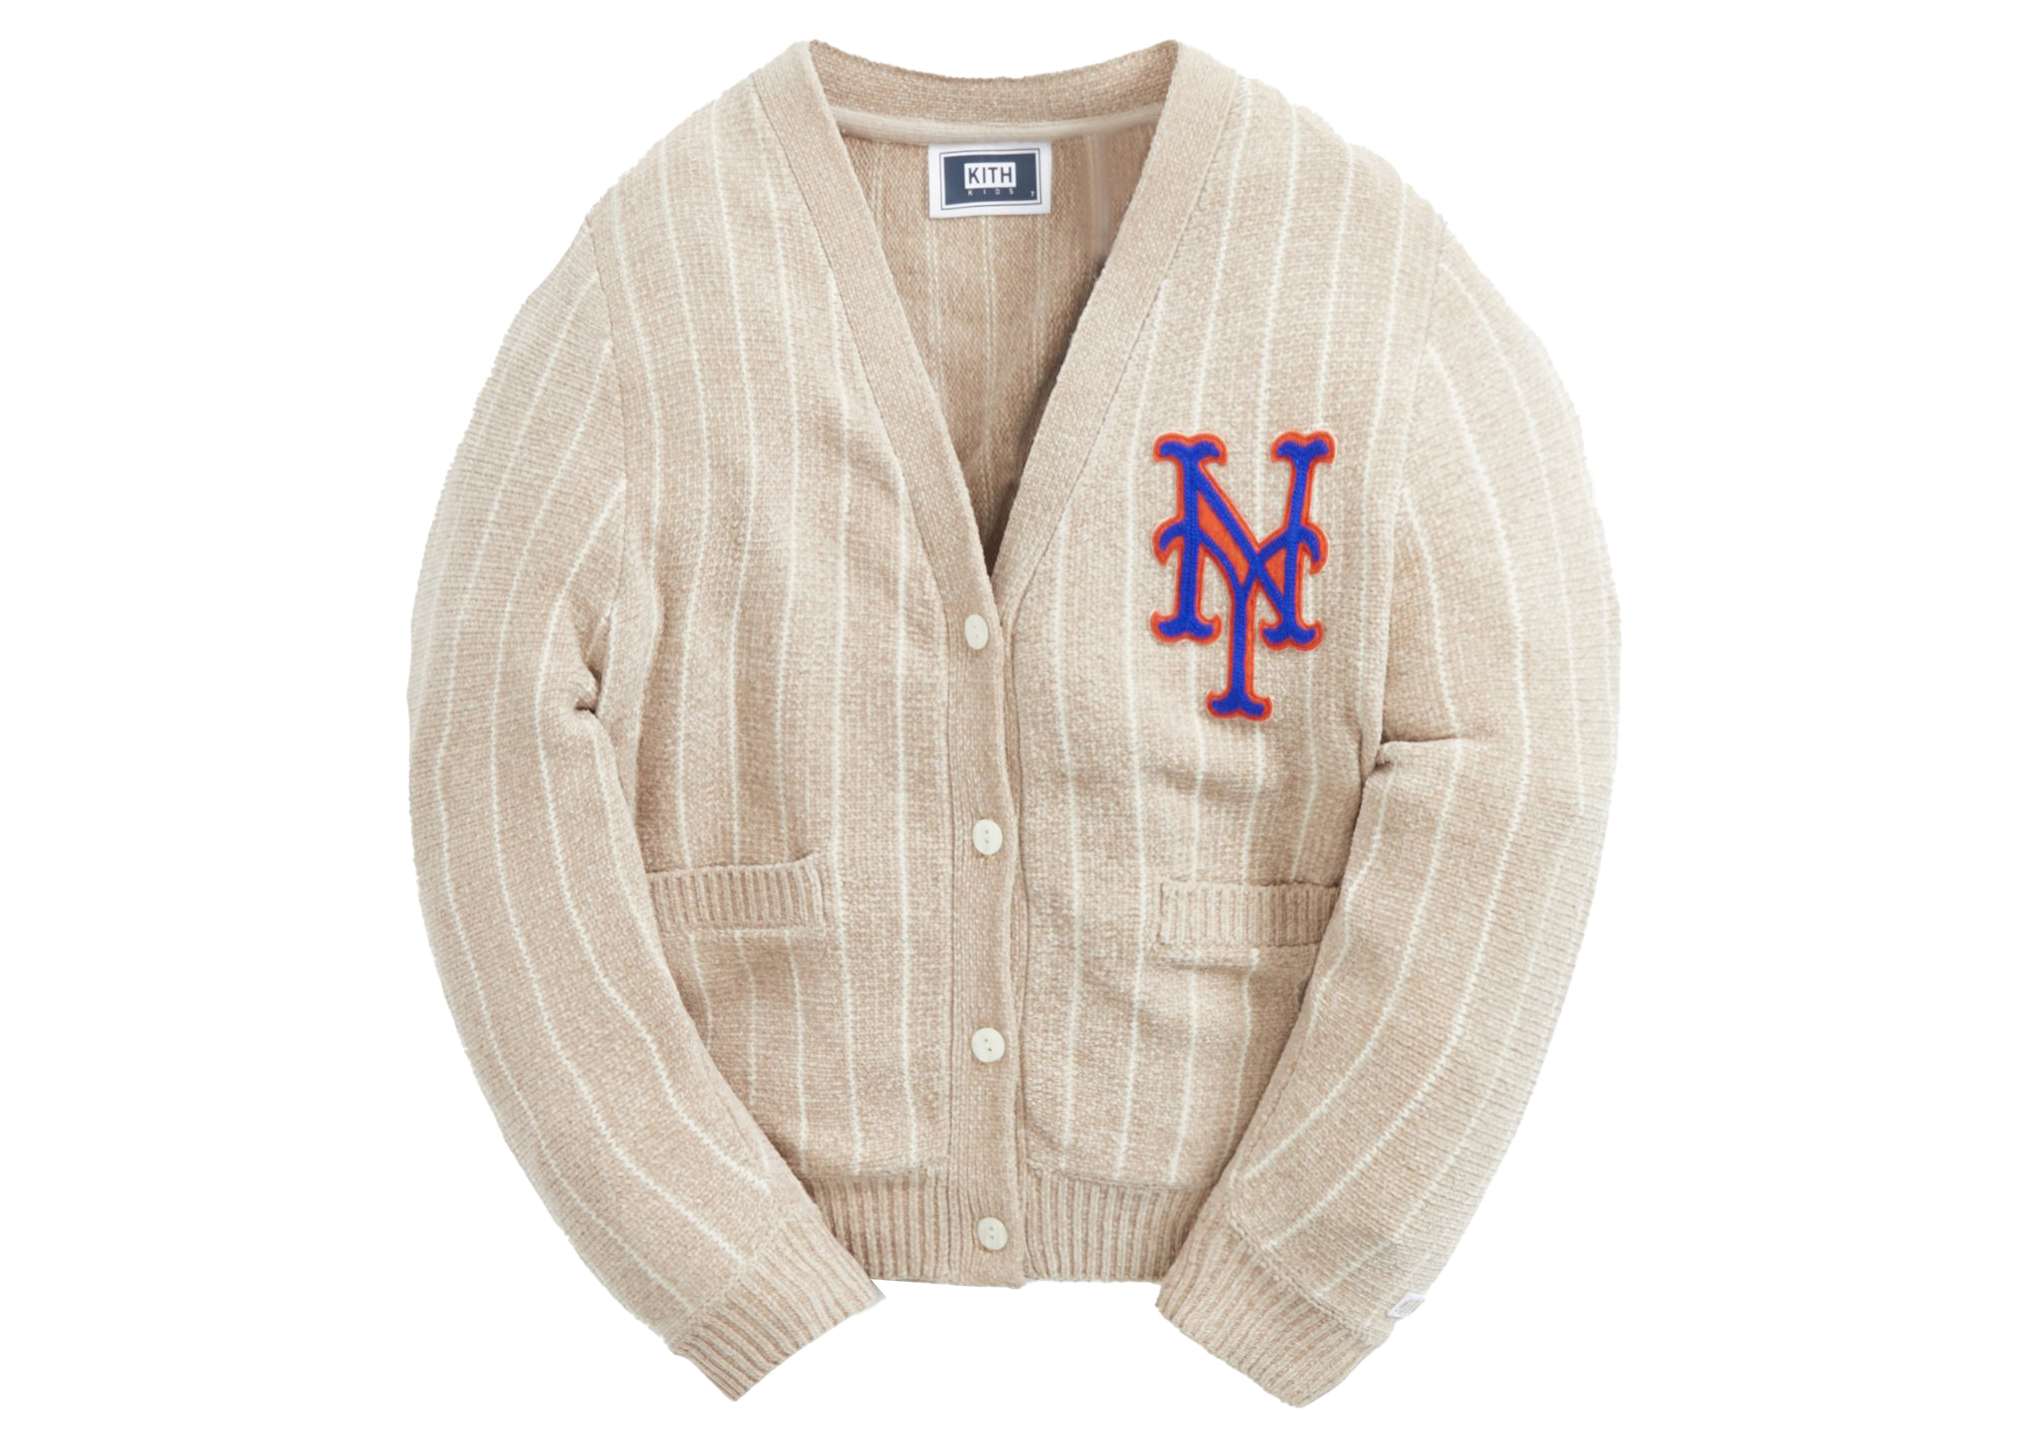 Kith Kids & MLB for New York Yankees Cardigan Oatmeal キッズ ...